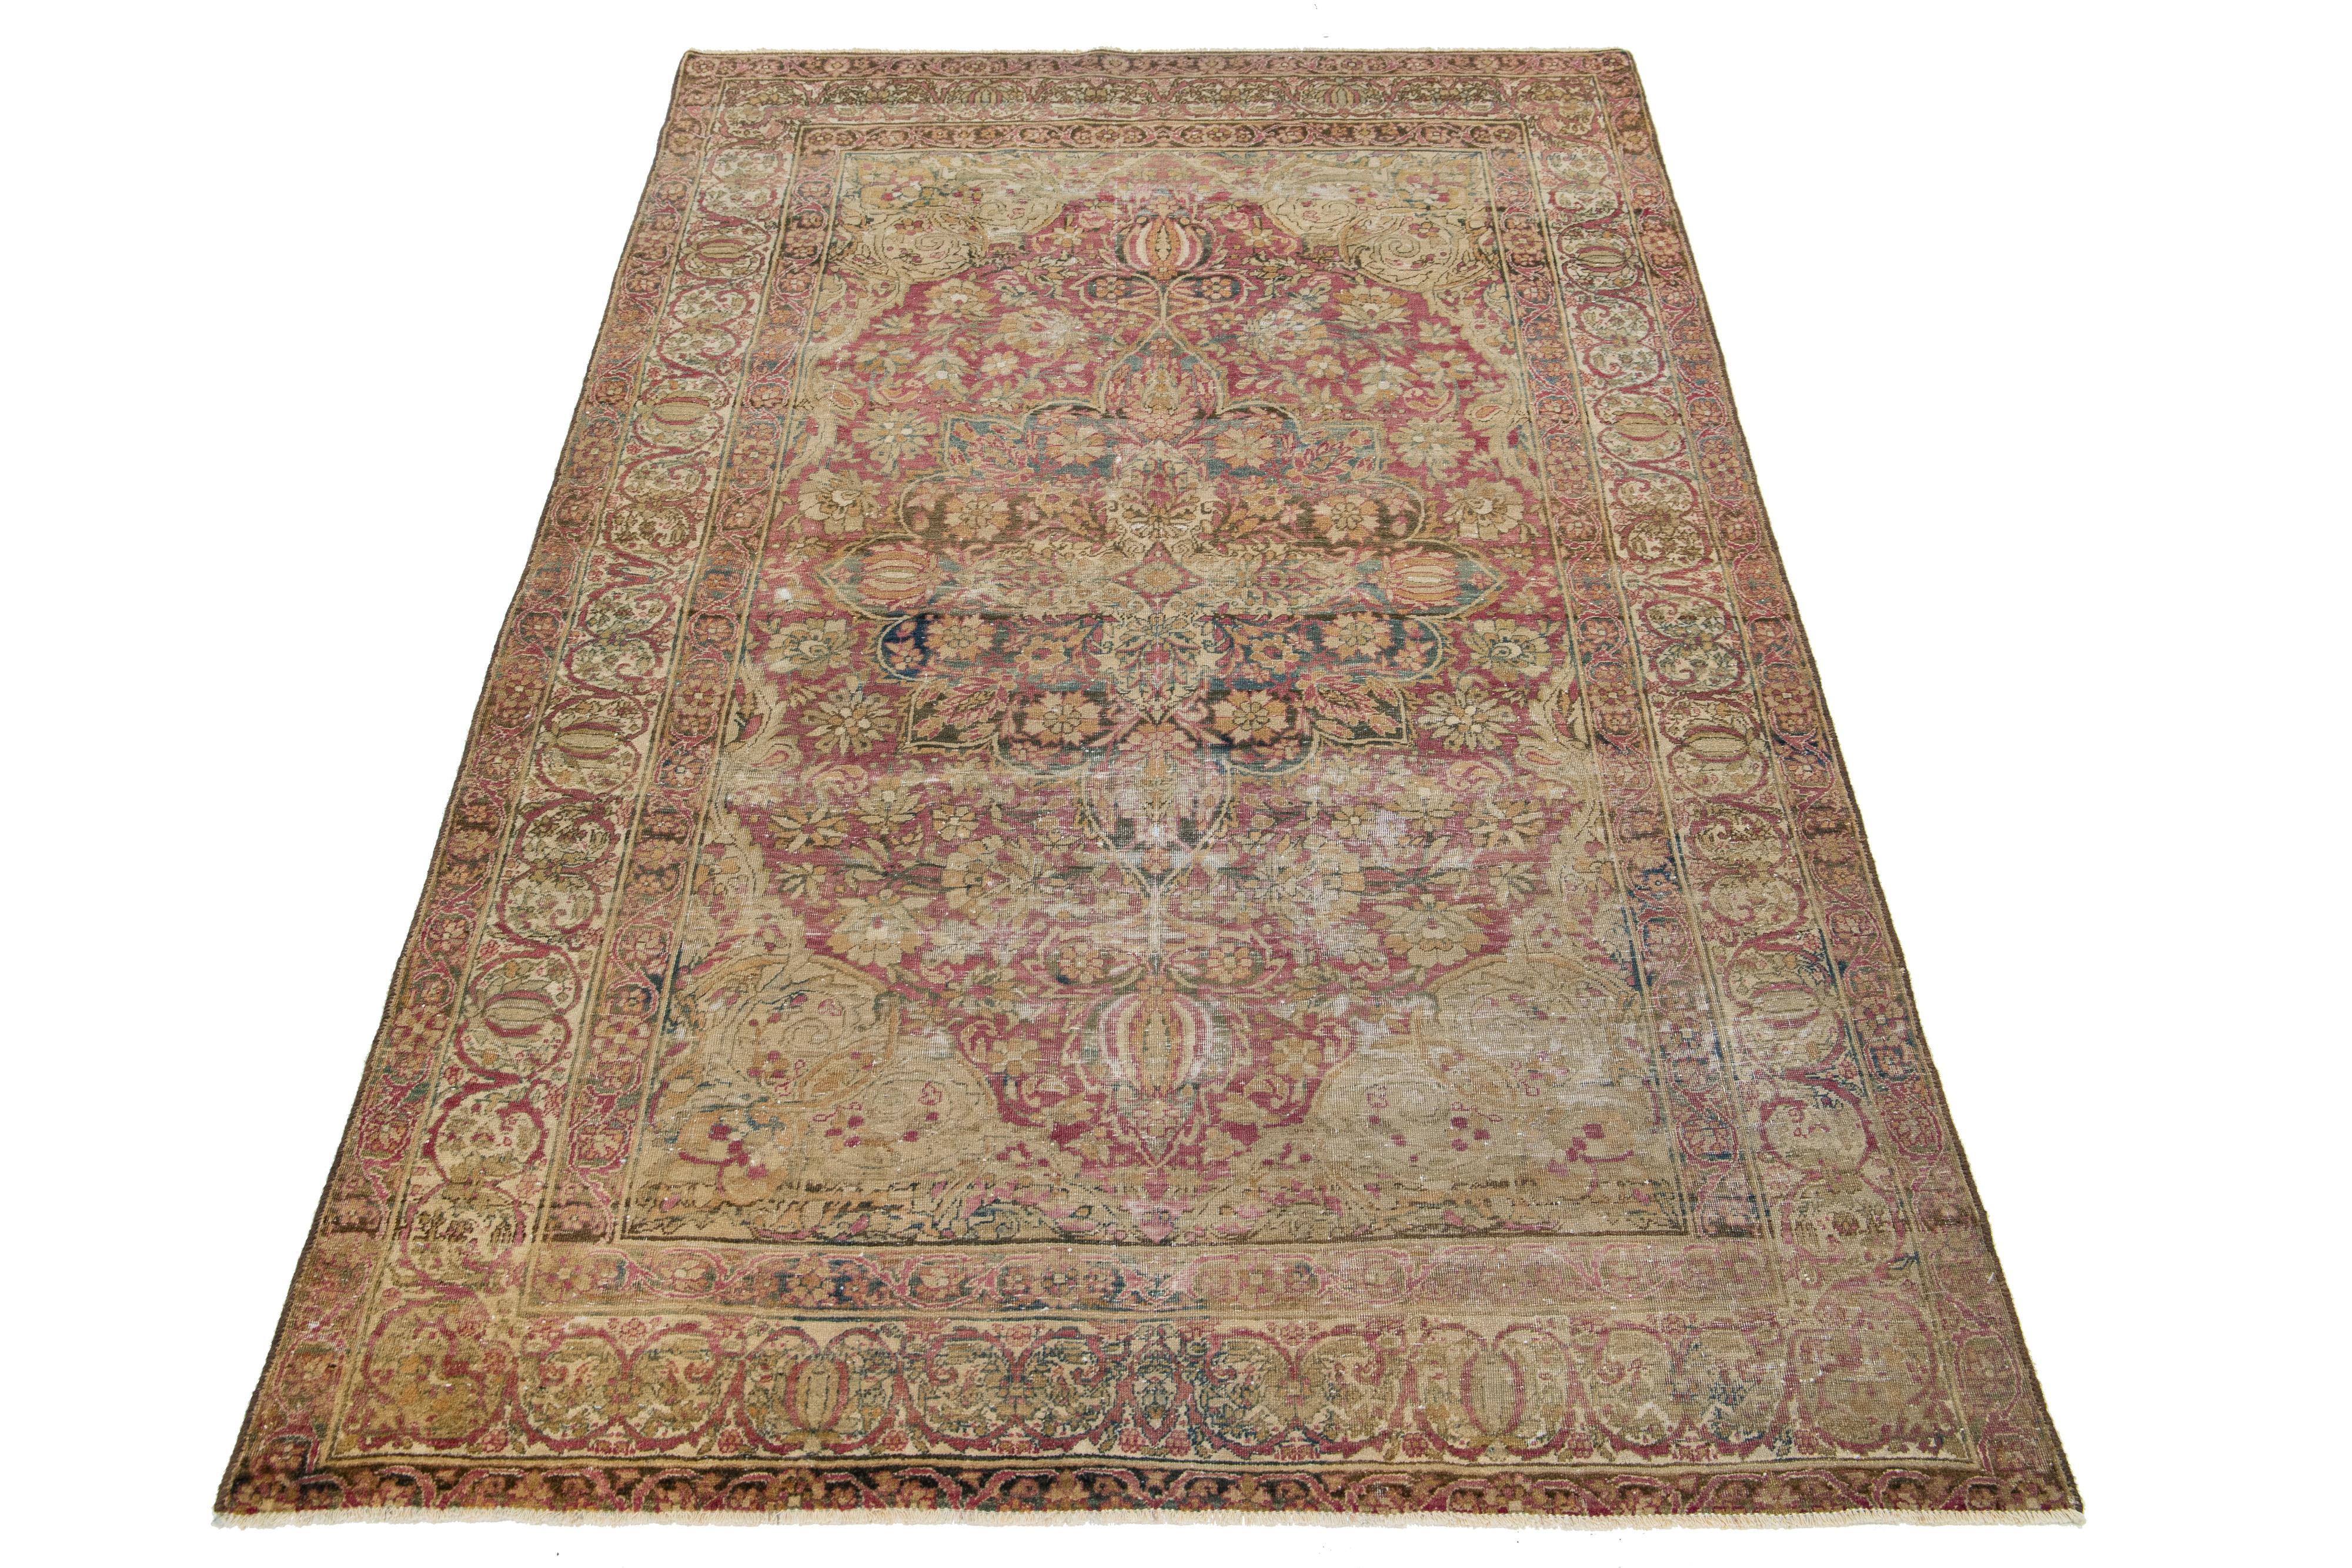 This Antique piece is a hand-knotted Persian Kerman rug with a texture and red field—Highlighted with red and blue accents in an all-over medallion floral pattern.

This rug measures 4' x 6'9